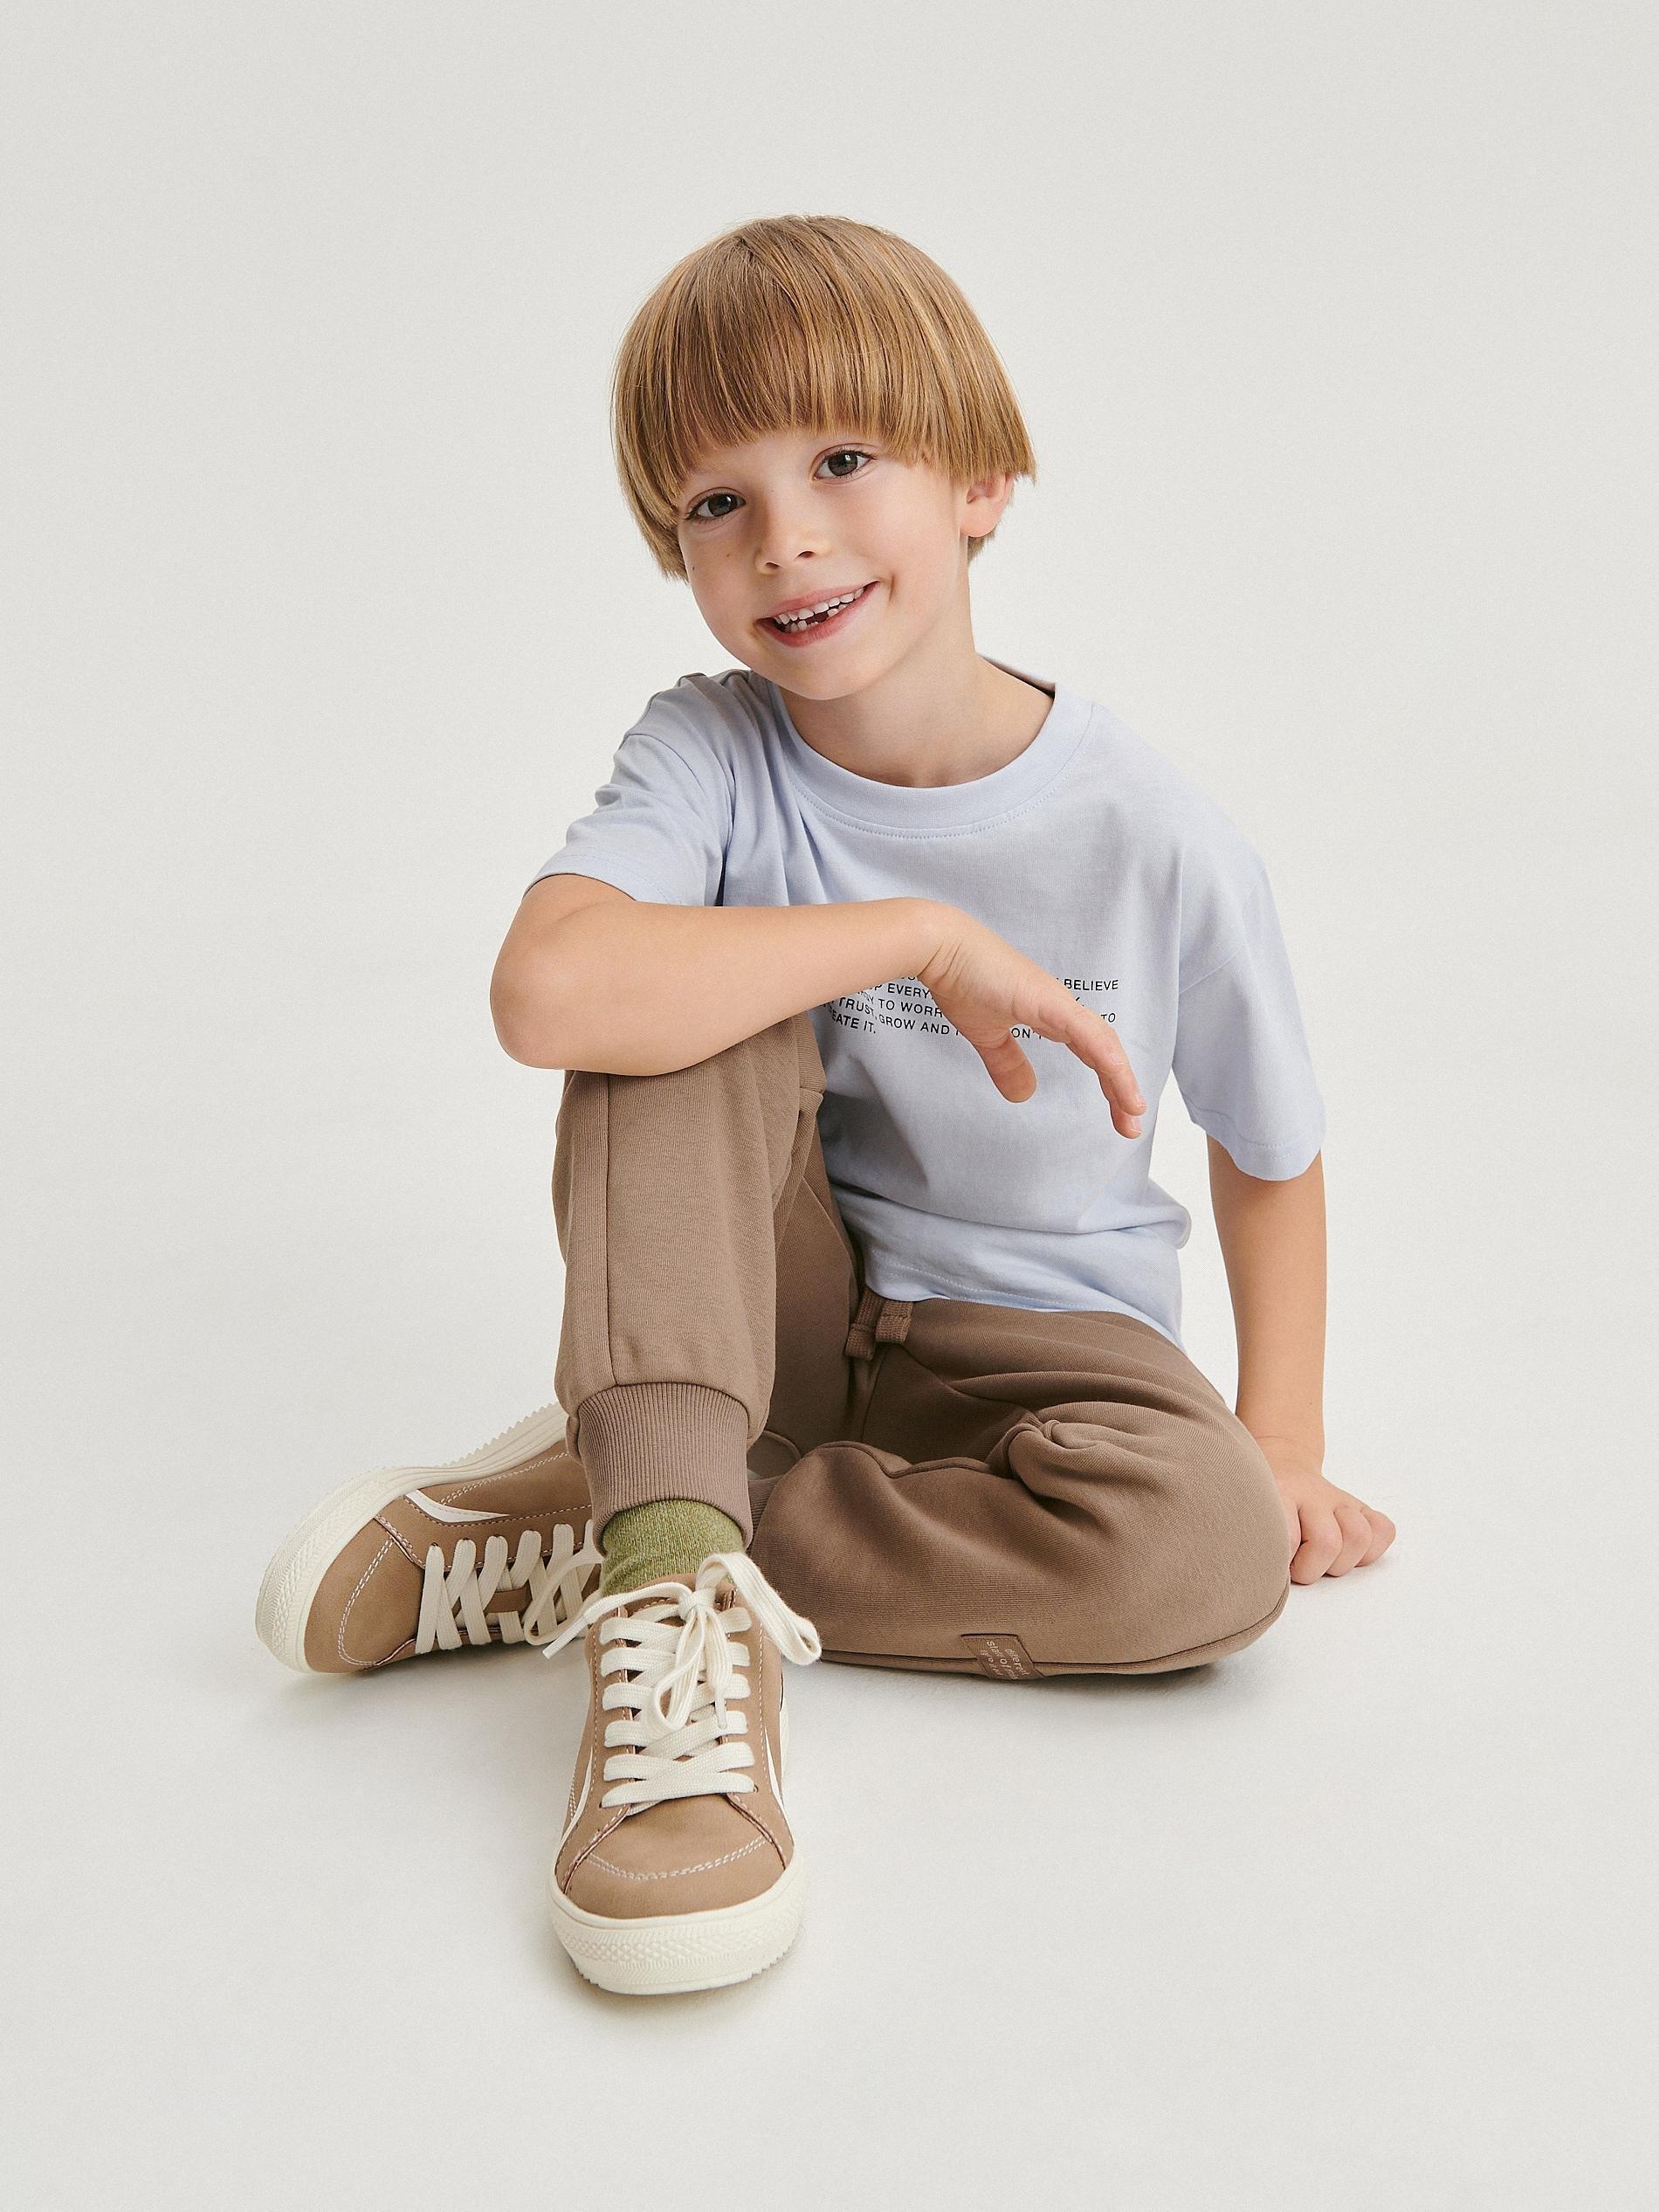 Reserved - Brown Cotton Joggers, Kids Boys